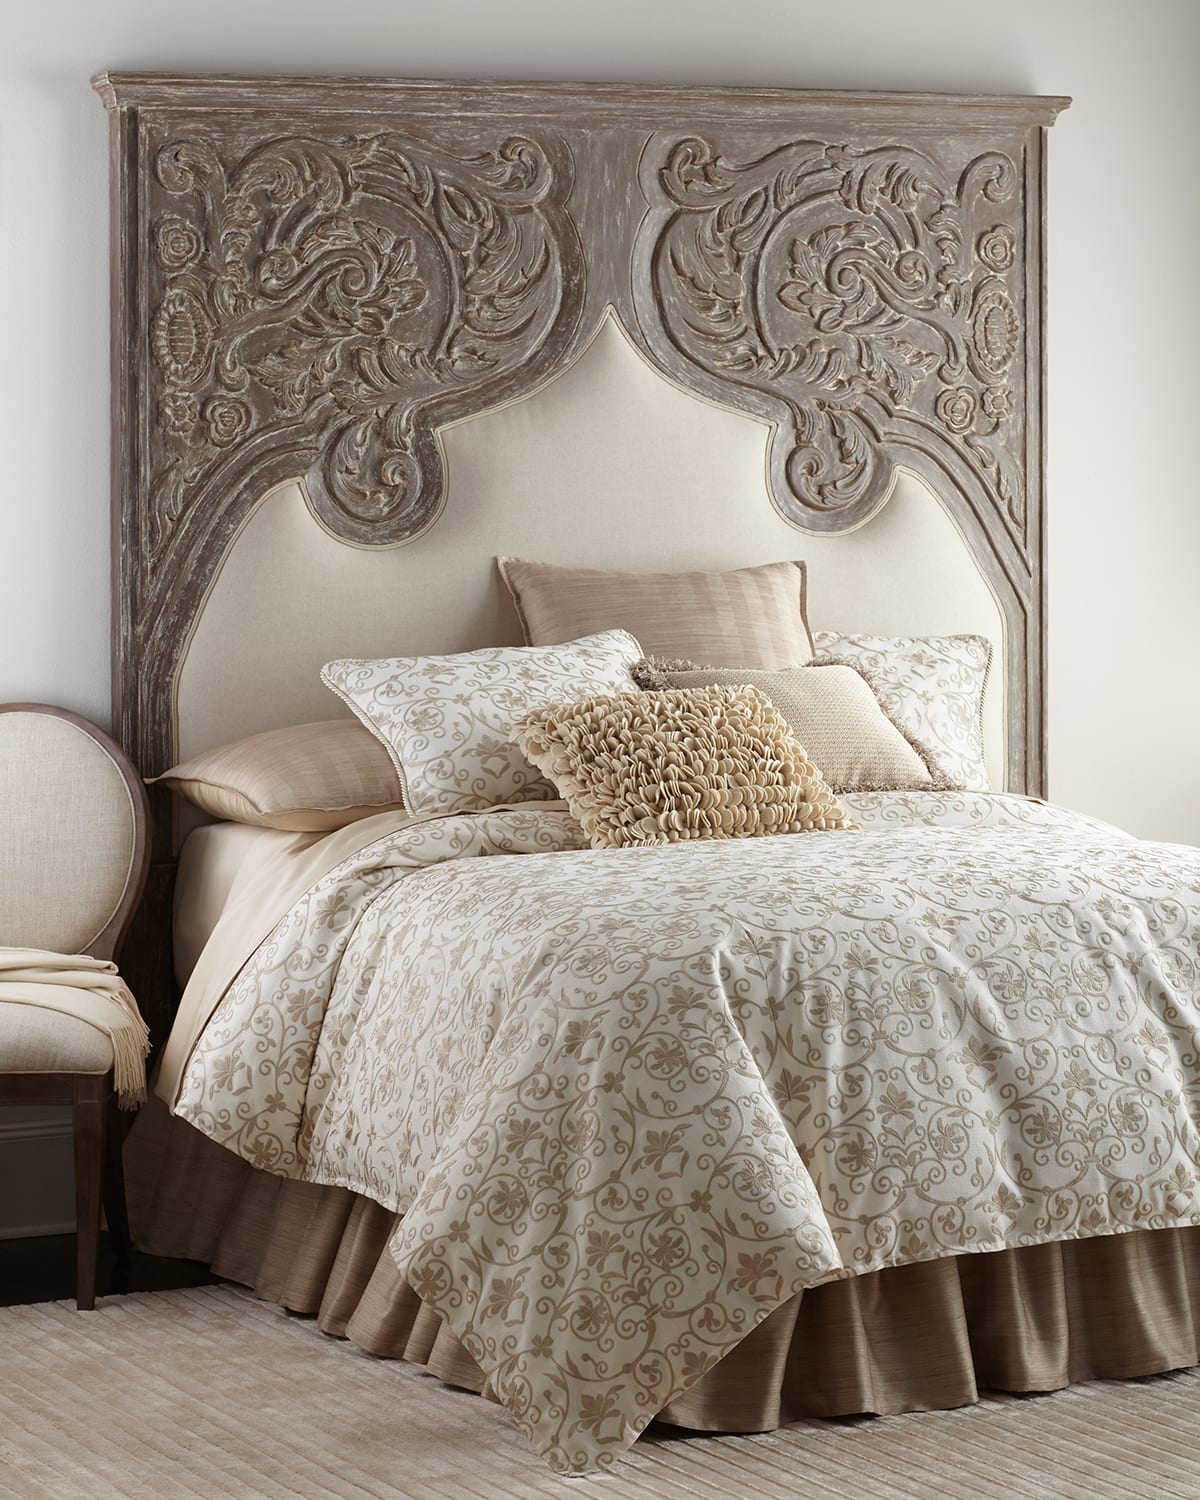 Peninsula Home Collection Erlina Carved Queen Headboard